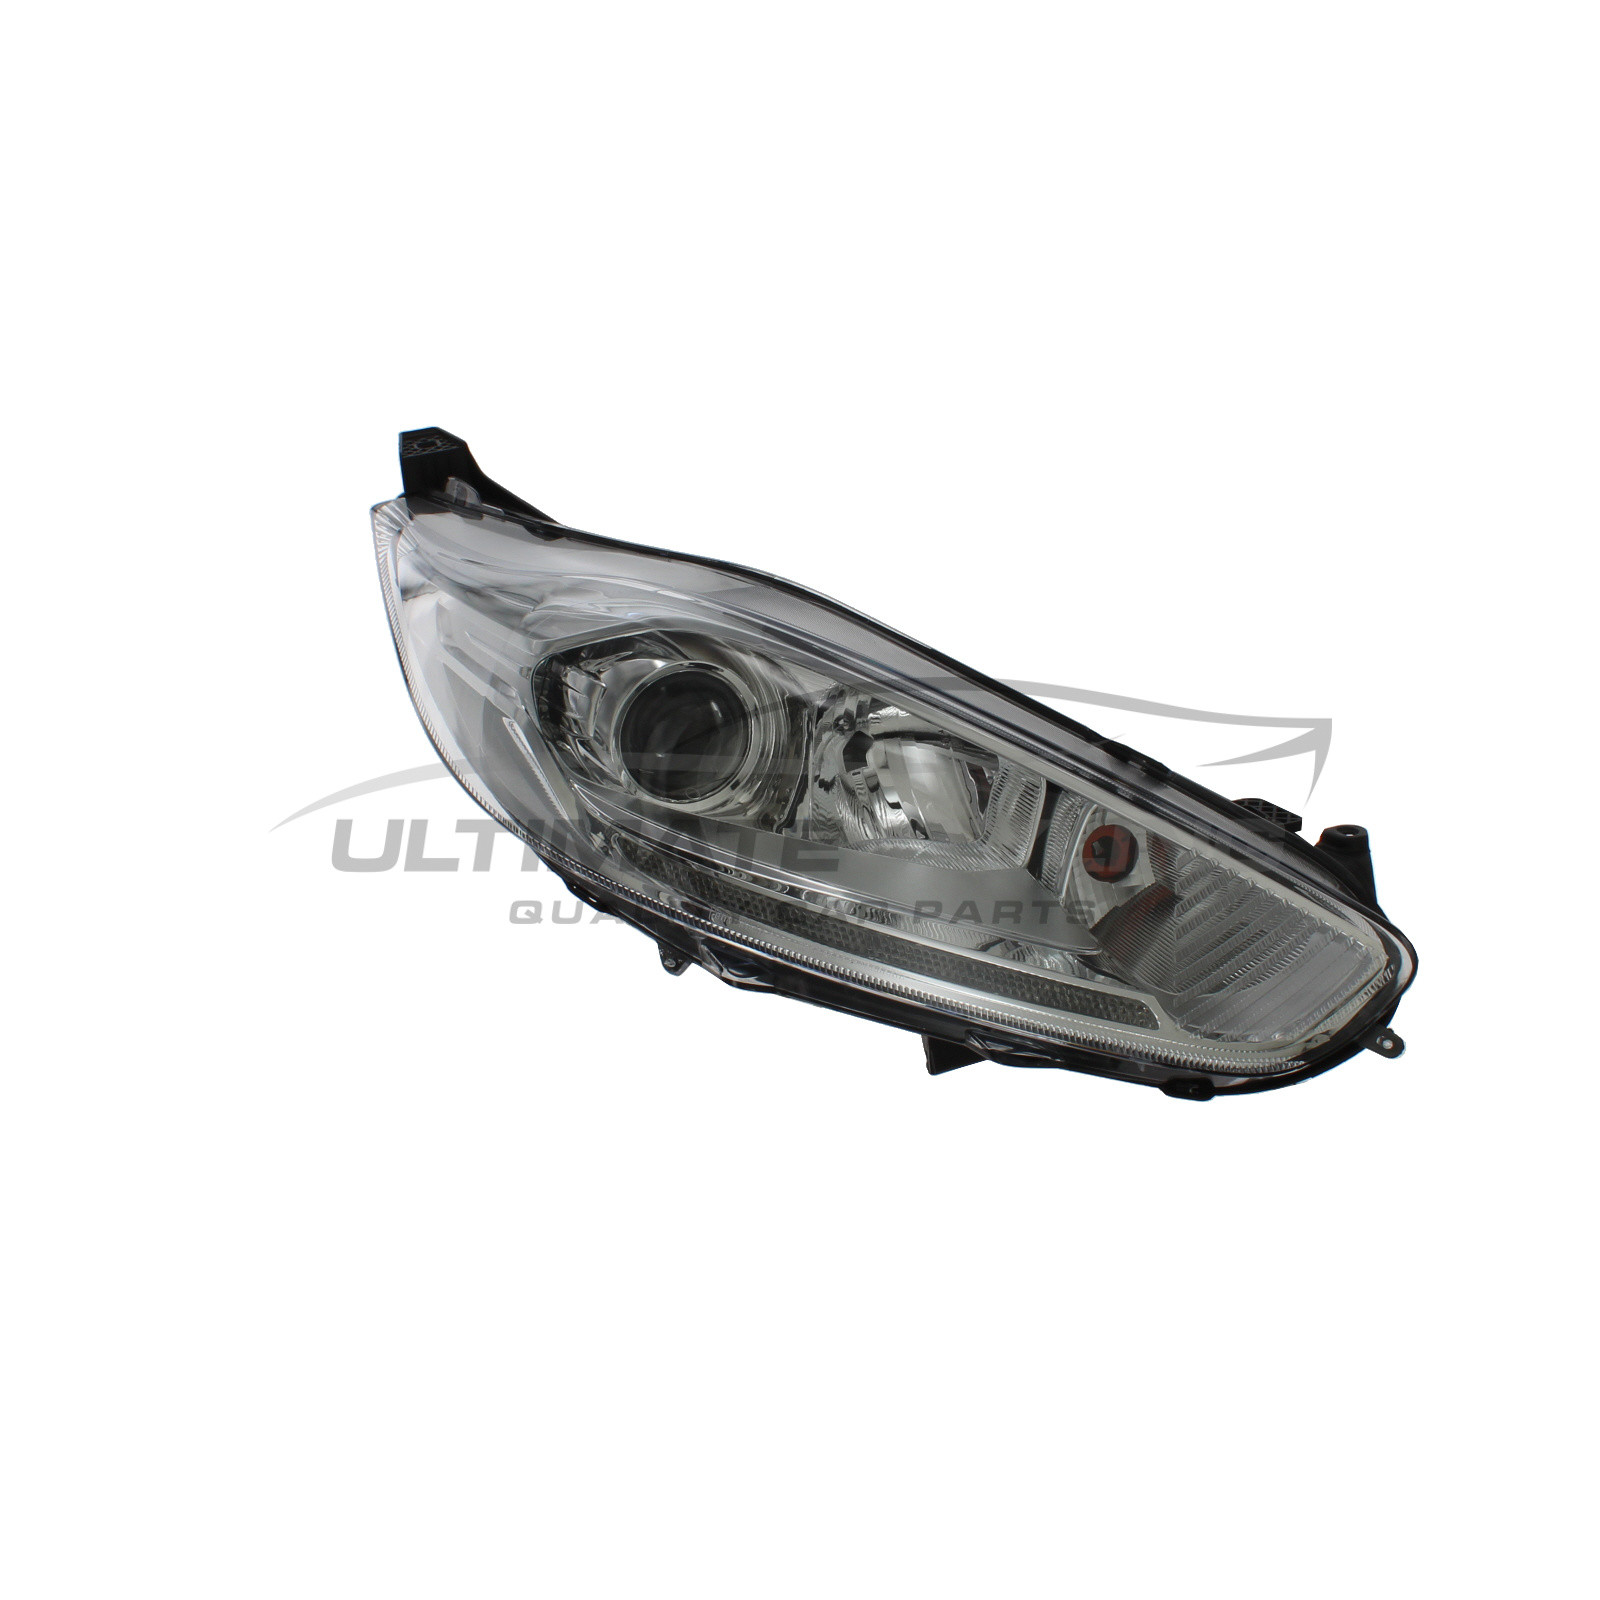 Ford Fiesta 2012-2017 Halogen With LED Daytime Running Lamp, Electric With Motor, Chrome Headlight / Headlamp (Projector Type) Drivers Side (RH)